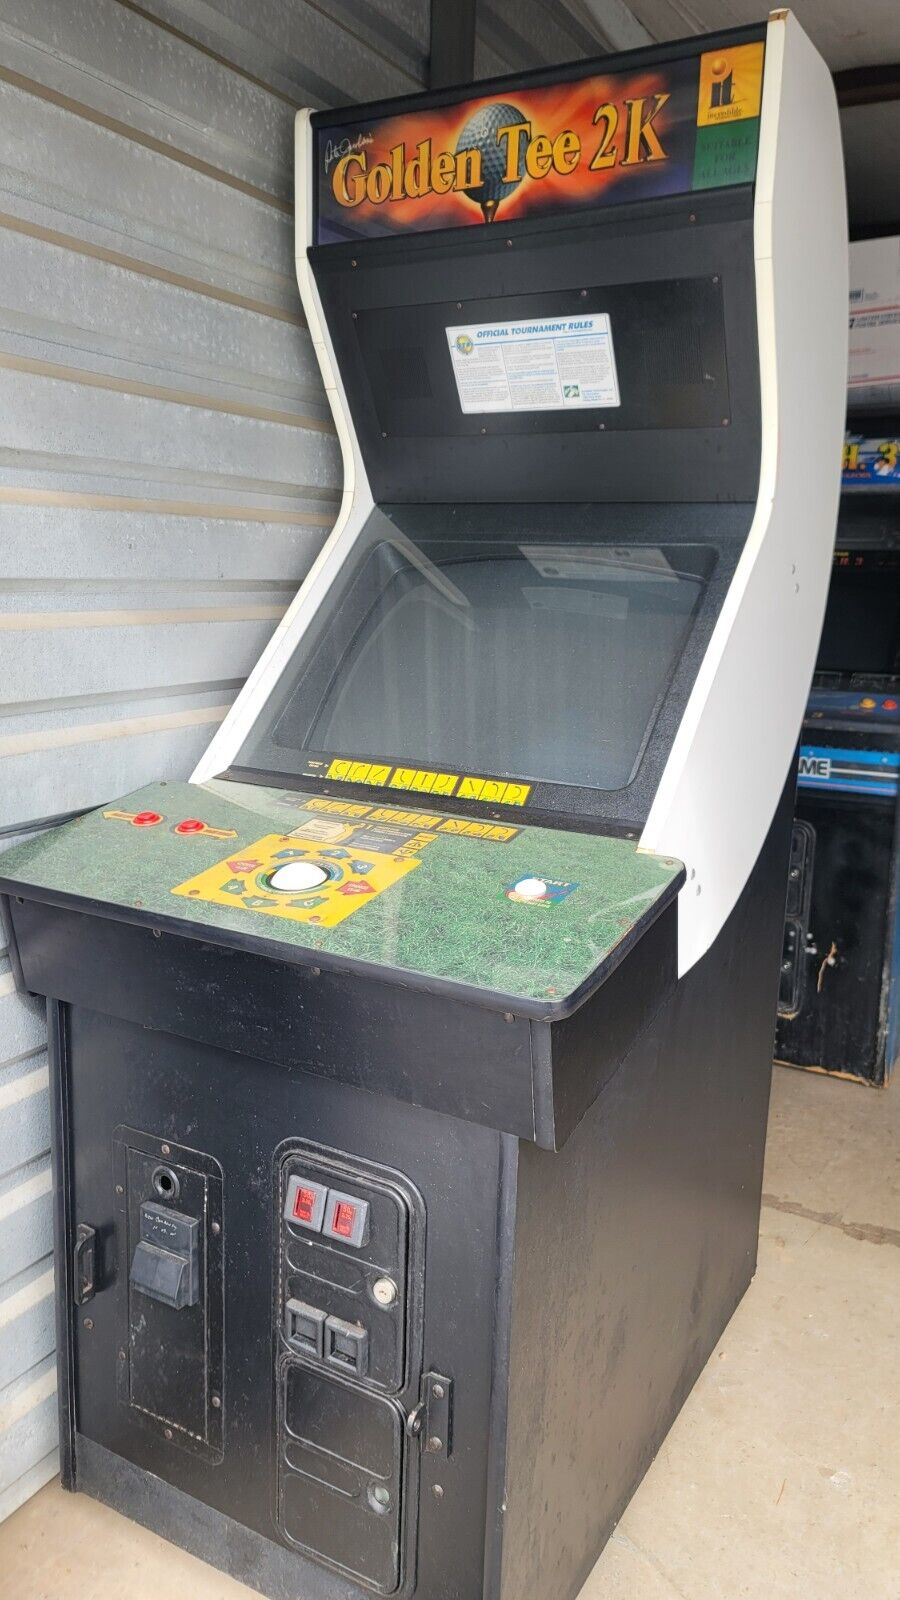 Dedicated Golden Tee Video Arcade Game Cabinet, Complete EXCEPT for monitor